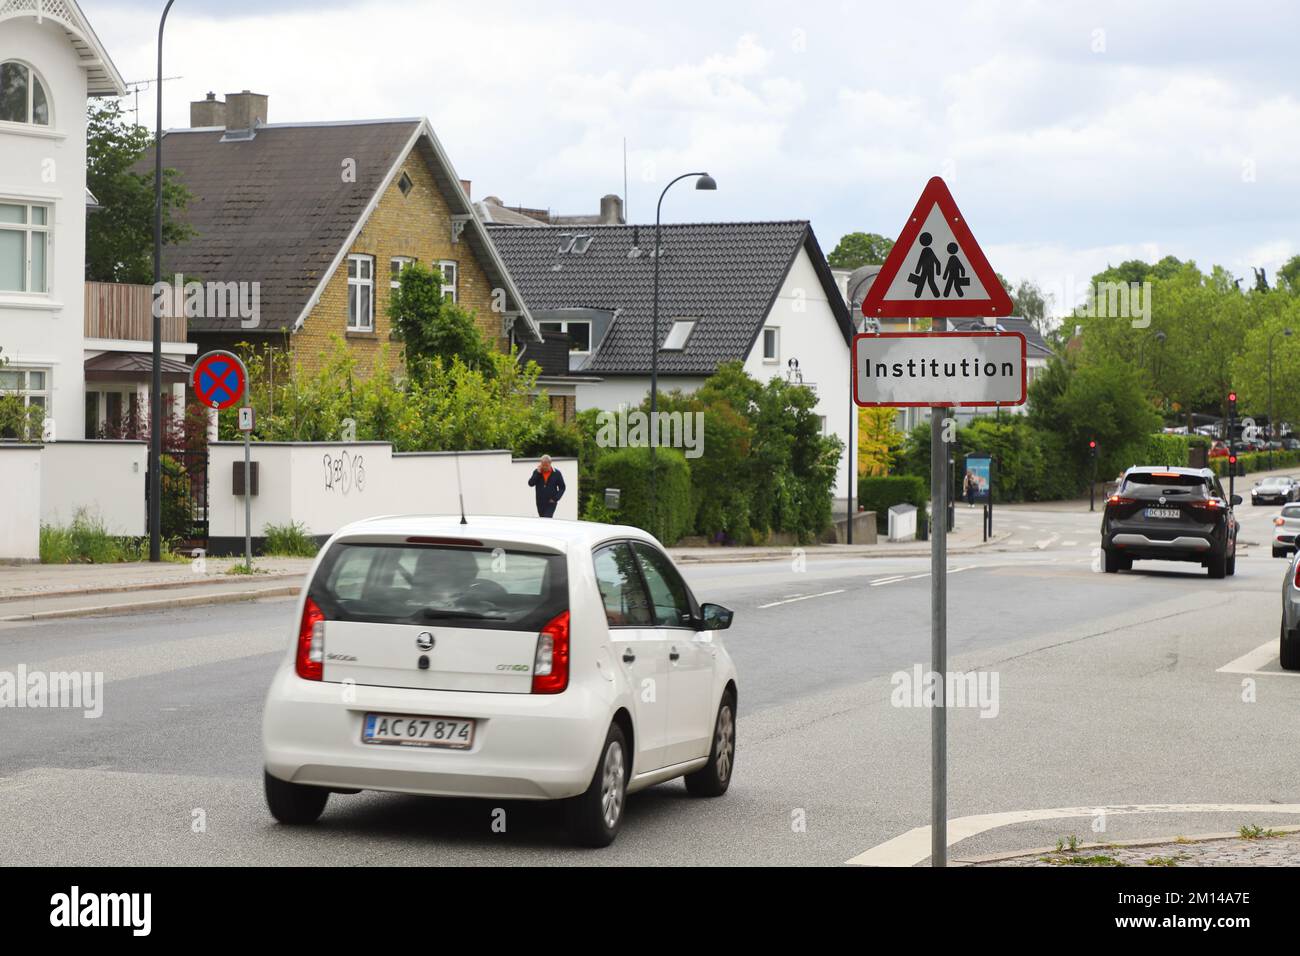 Hellerup, Denmark - June 14, 2022: Road sign warning for children near a school on a suburban street with detached houses. Stock Photo